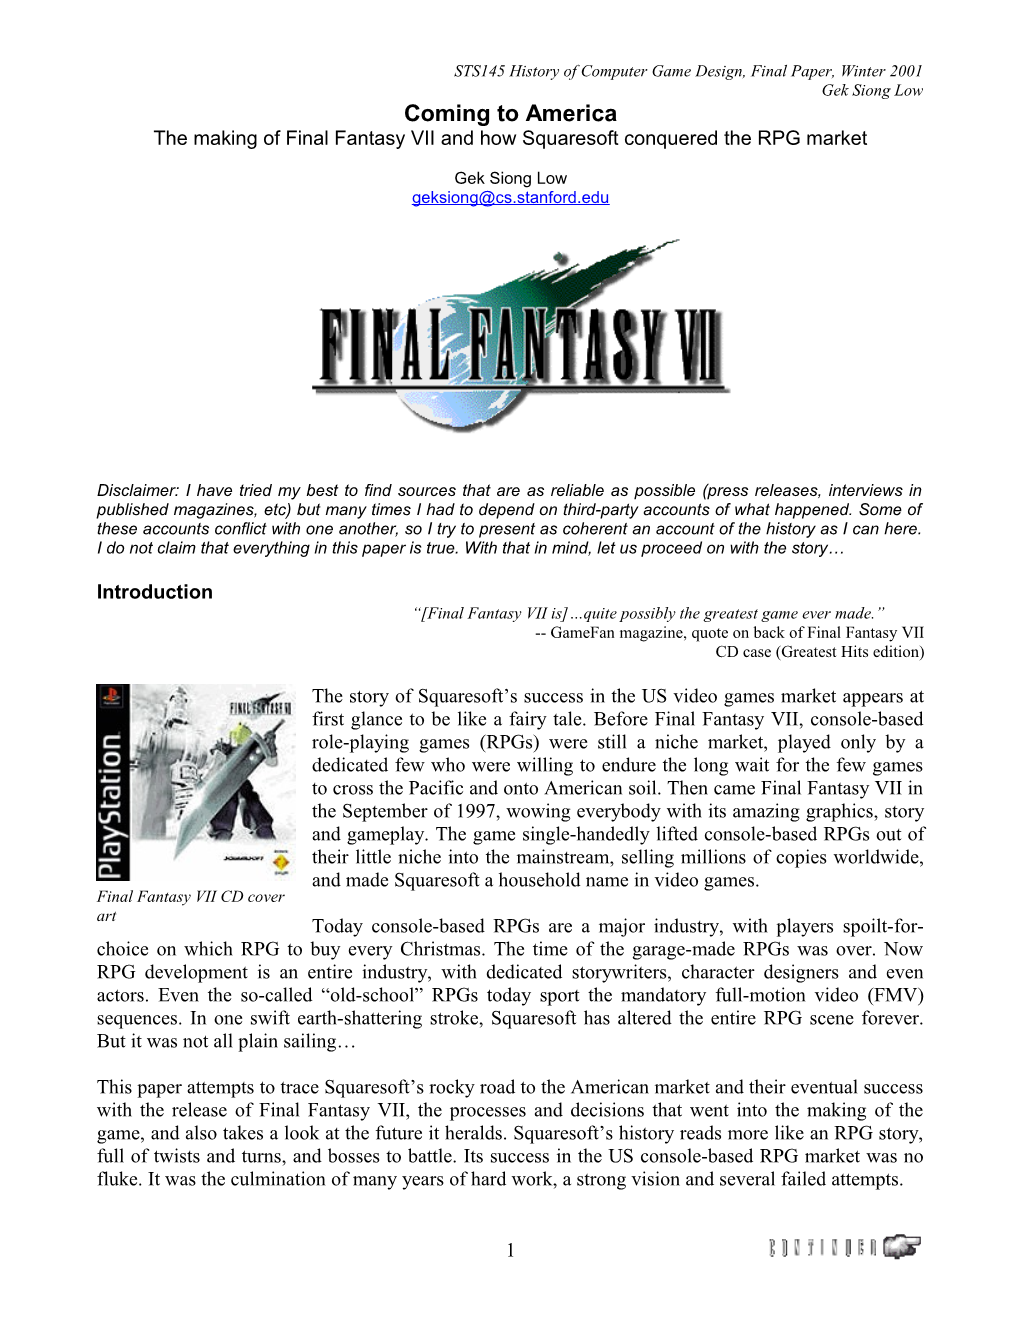 Coming to America: the Story of Final Fantasy VII and How Squaresoft Conquered the RPG Market